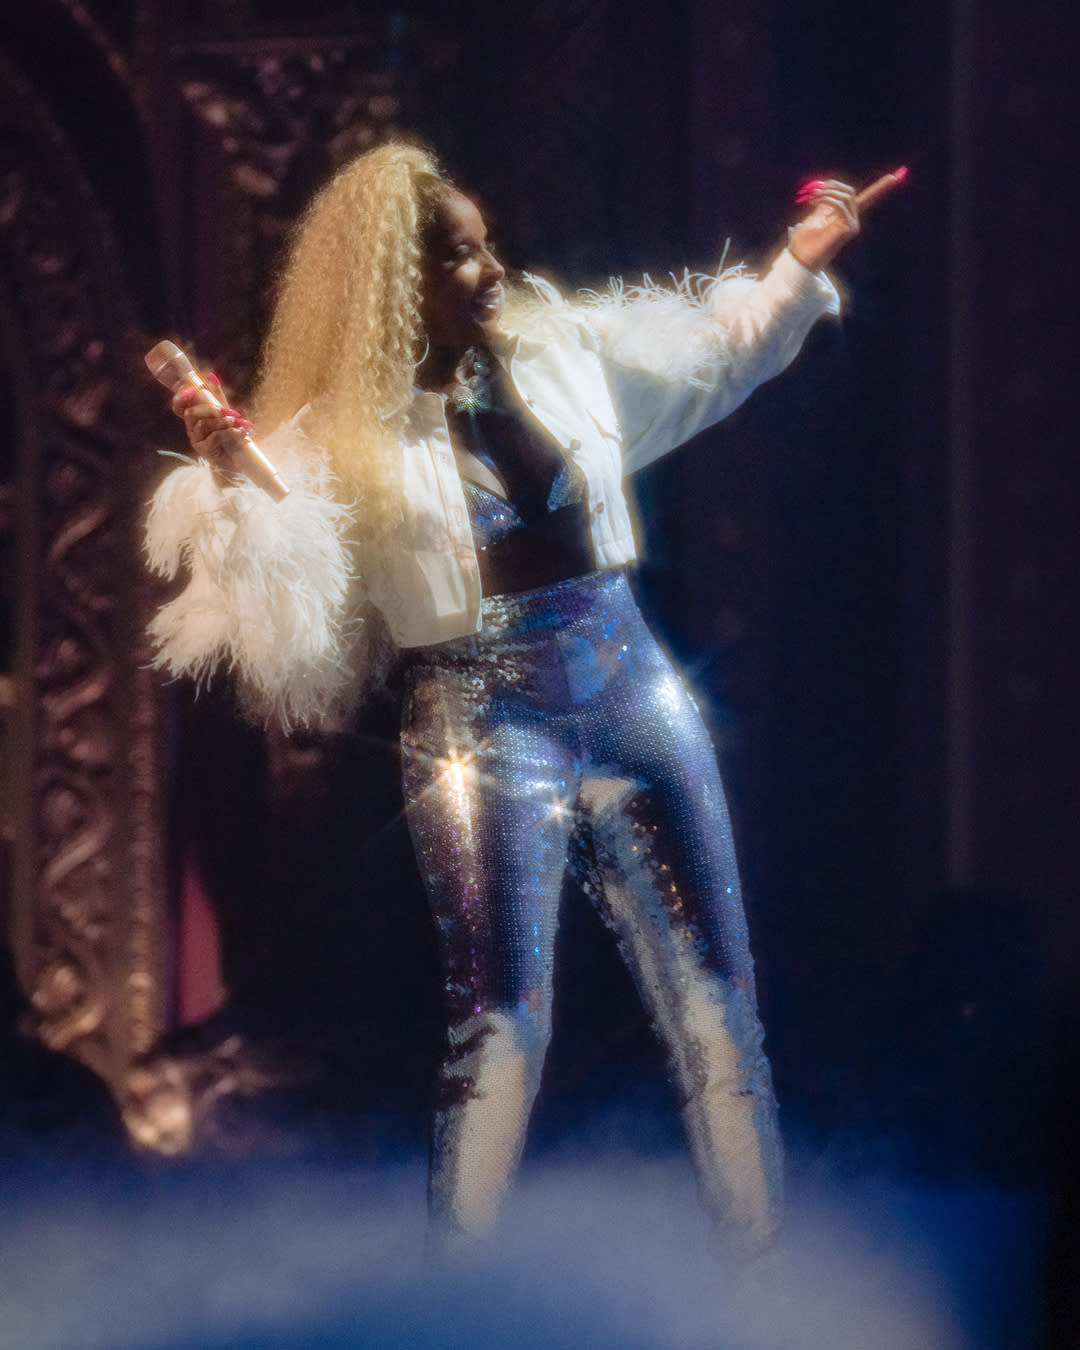 mary j blige smiling on stage in blonde hair, white jacket, and sparkling pants